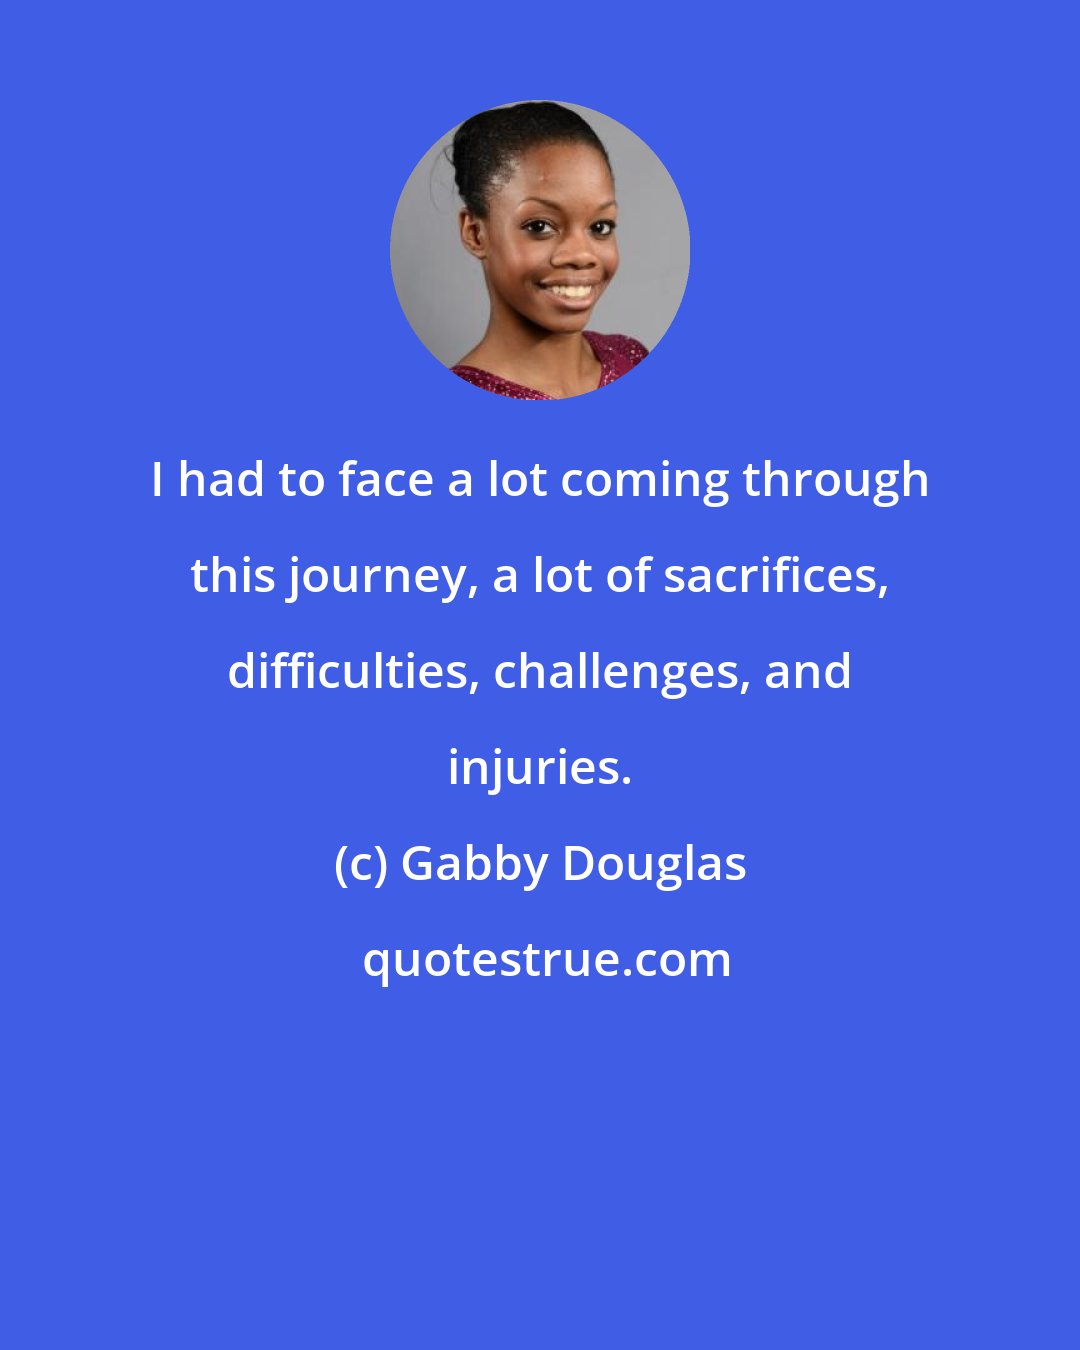 Gabby Douglas: I had to face a lot coming through this journey, a lot of sacrifices, difficulties, challenges, and injuries.